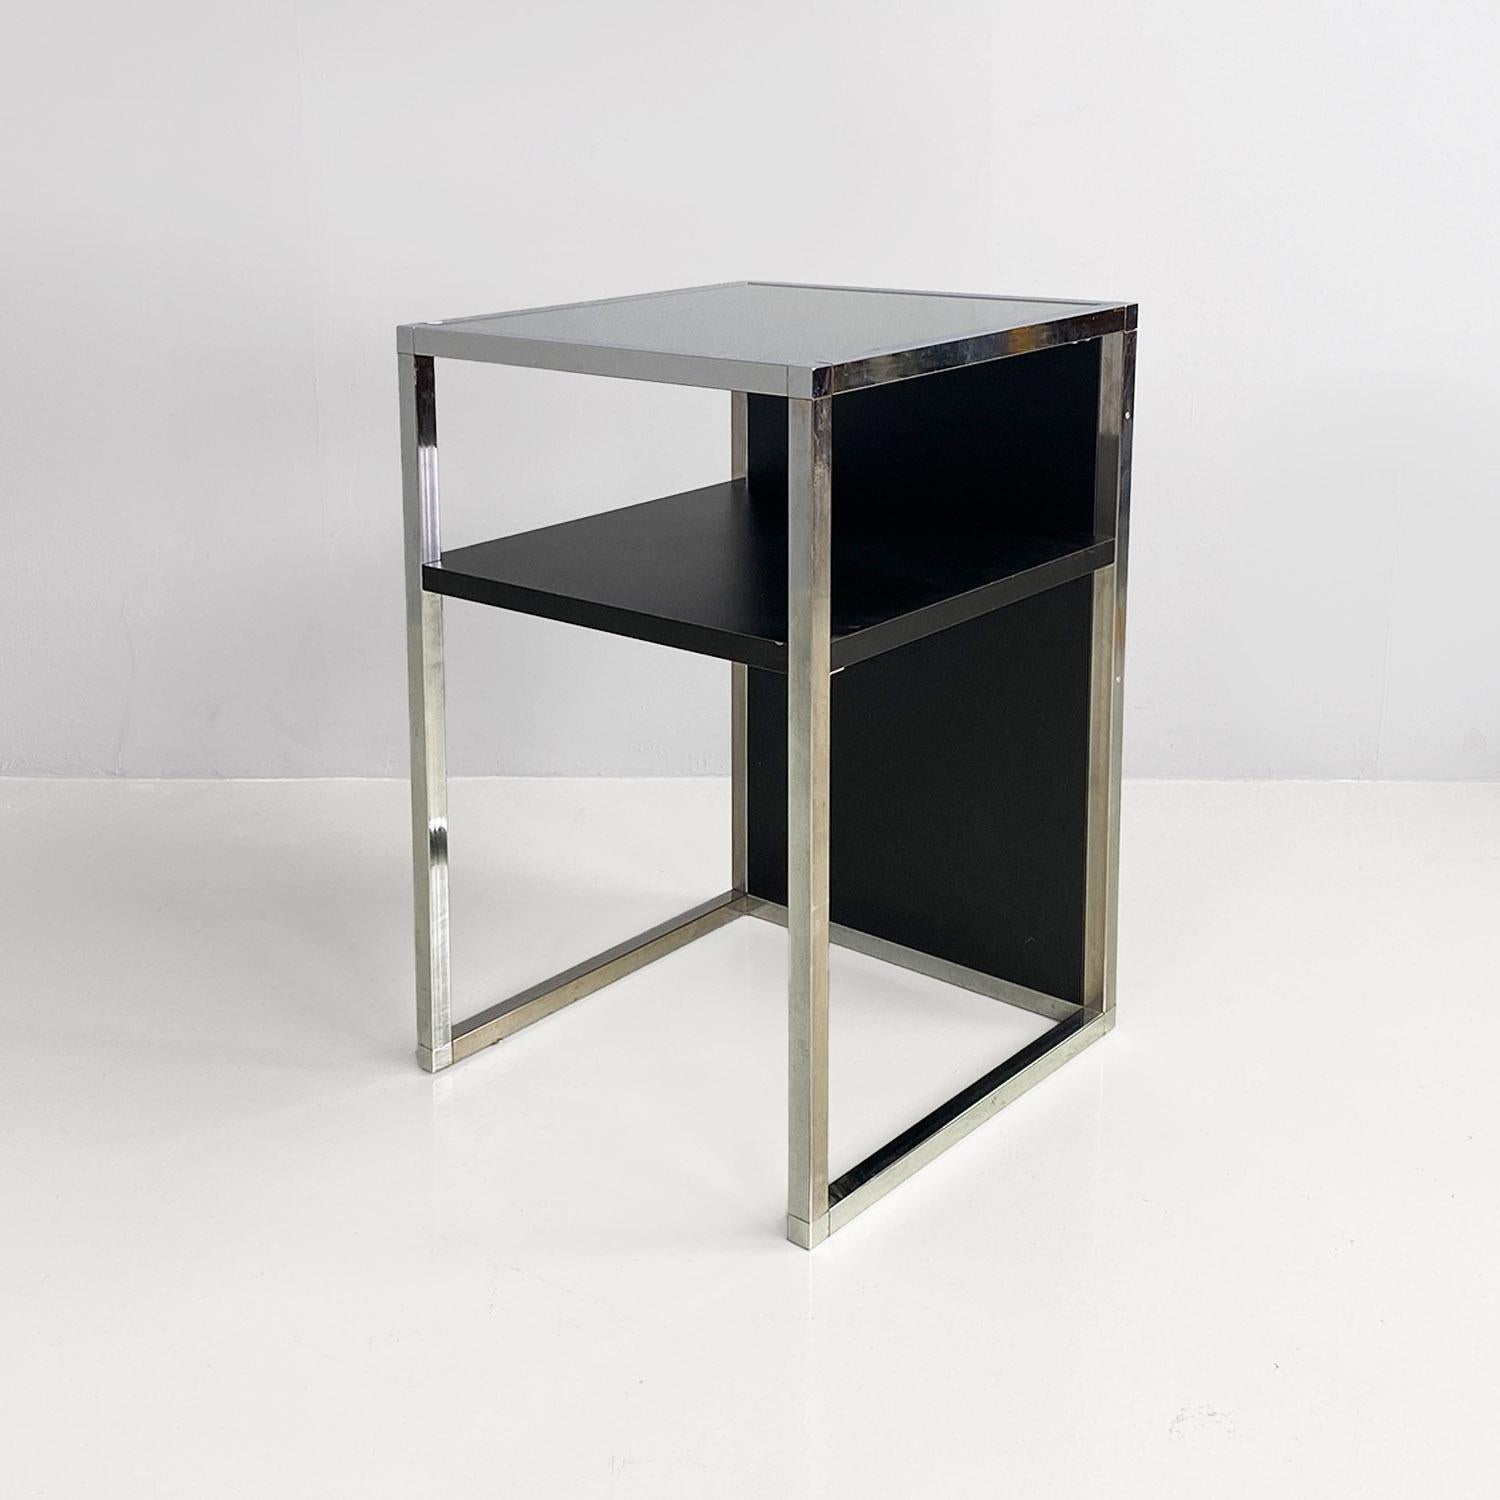 Italian modern chromed steel, wood and glass table for stereo and vinyls, 1990s.
Table for stereo and for storing vinyl records, with a square section structure in chromed steel, with a solid wood top covered in glass with a matt black finish and a